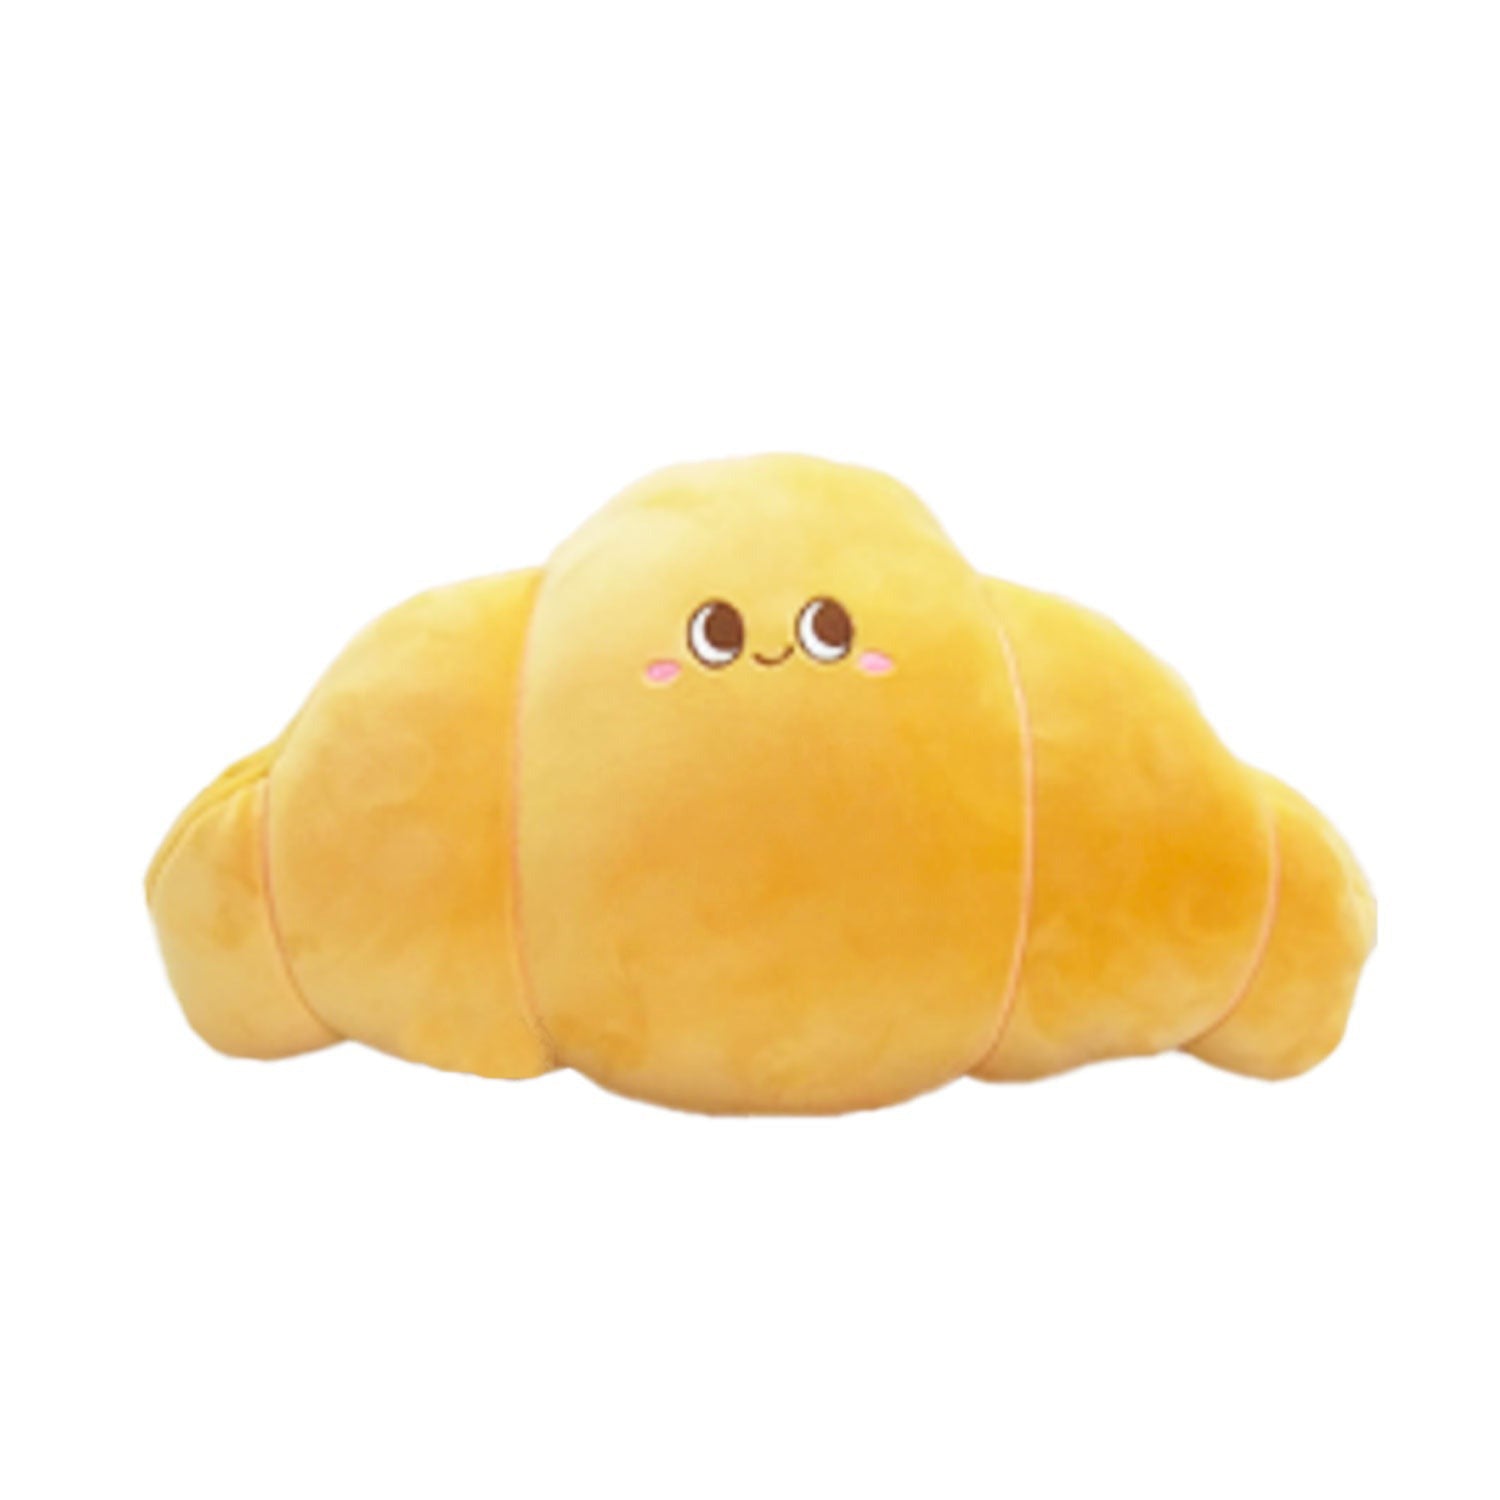 MINISO HAPPY FOODS COLLECTION 8IN. CROISSANT HAND WARMER PILLOW 2014282510100 CARTOON PILLOW